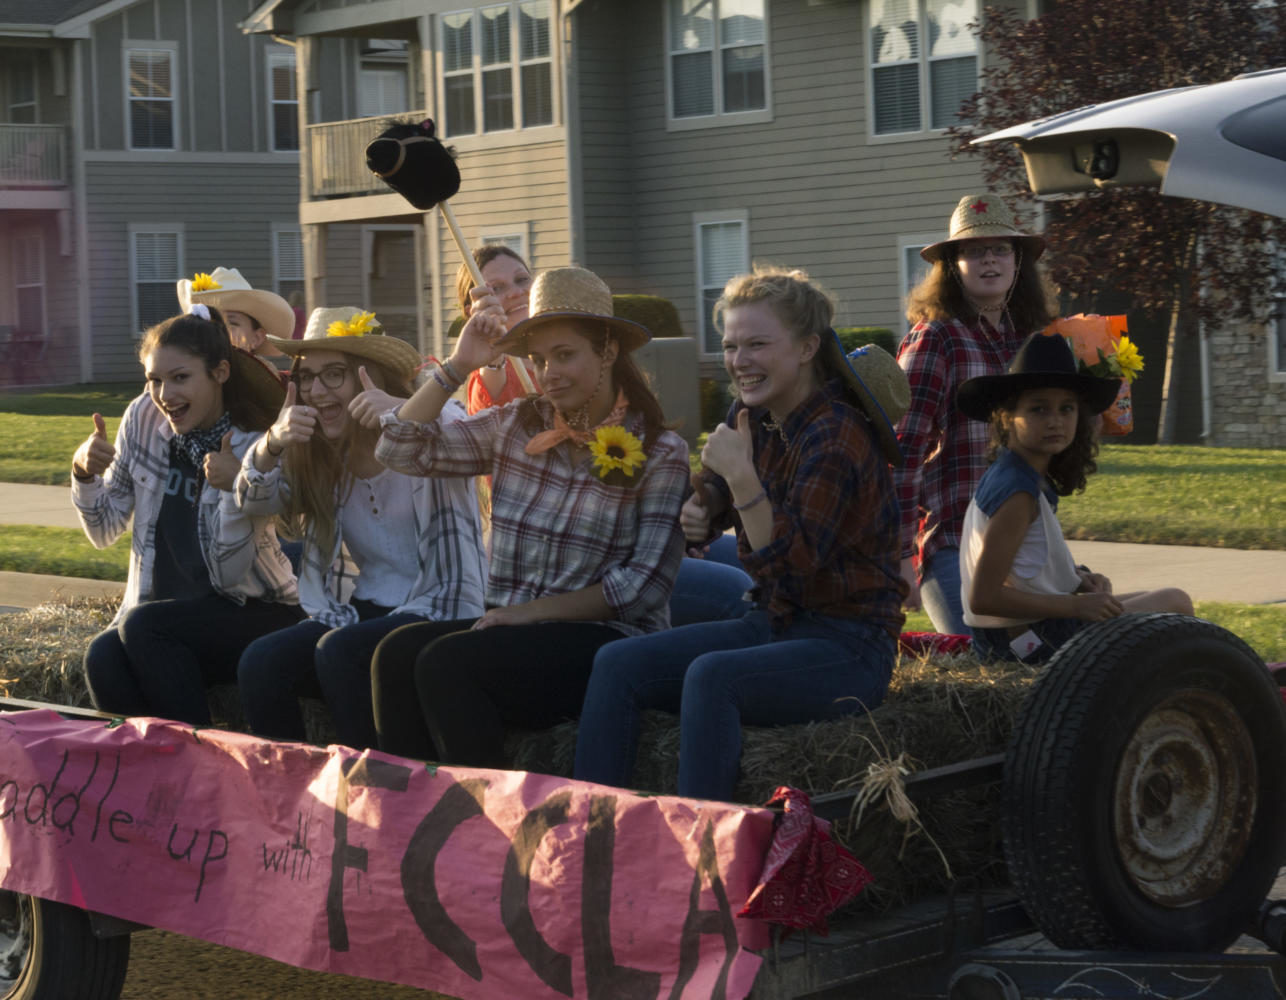 FCCLA members Caroline Kelton, Joplin Kean, Kaya Shafer, and Anna-Maya Hachmeister saddle up on their float. The homecoming parade began at Overland Dr. and Queens.